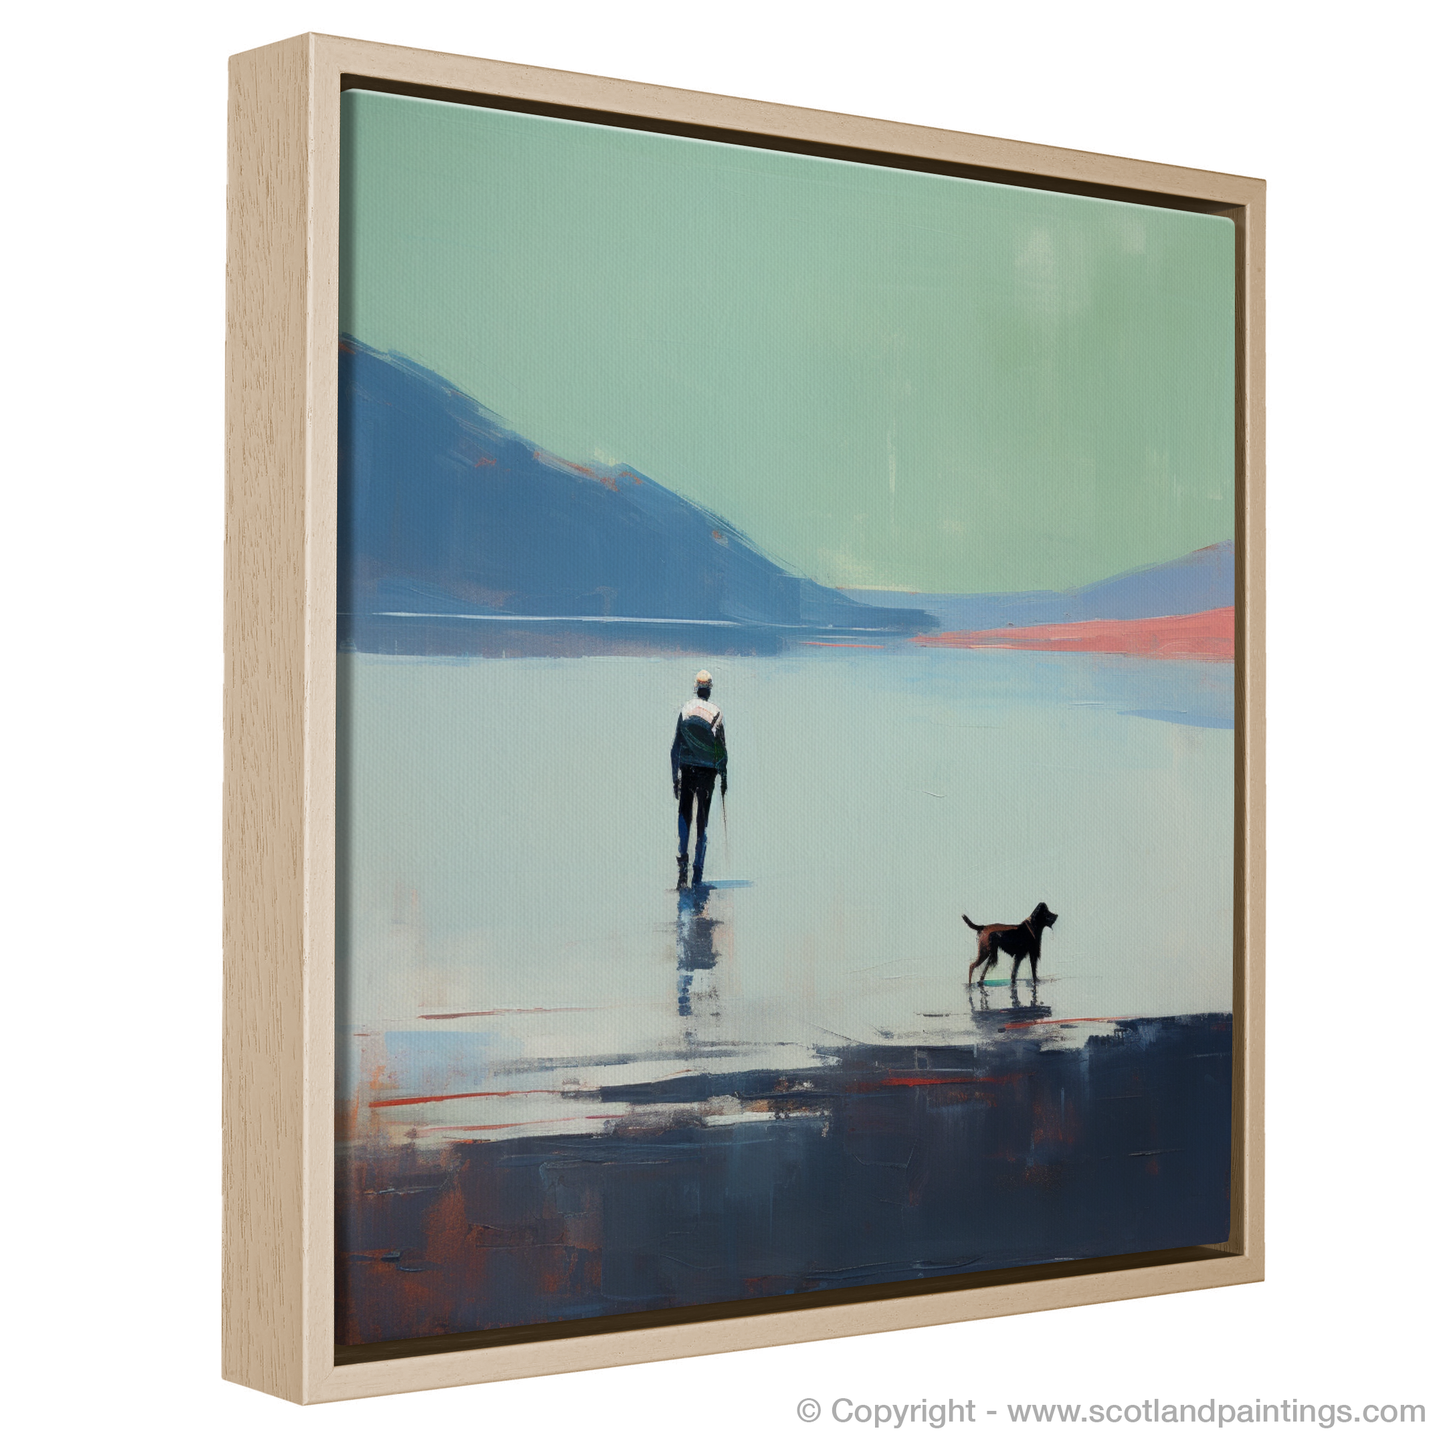 Painting and Art Print of A man walking dog at the side of Loch Lomond entitled "Walking Companion by Loch Lomond".